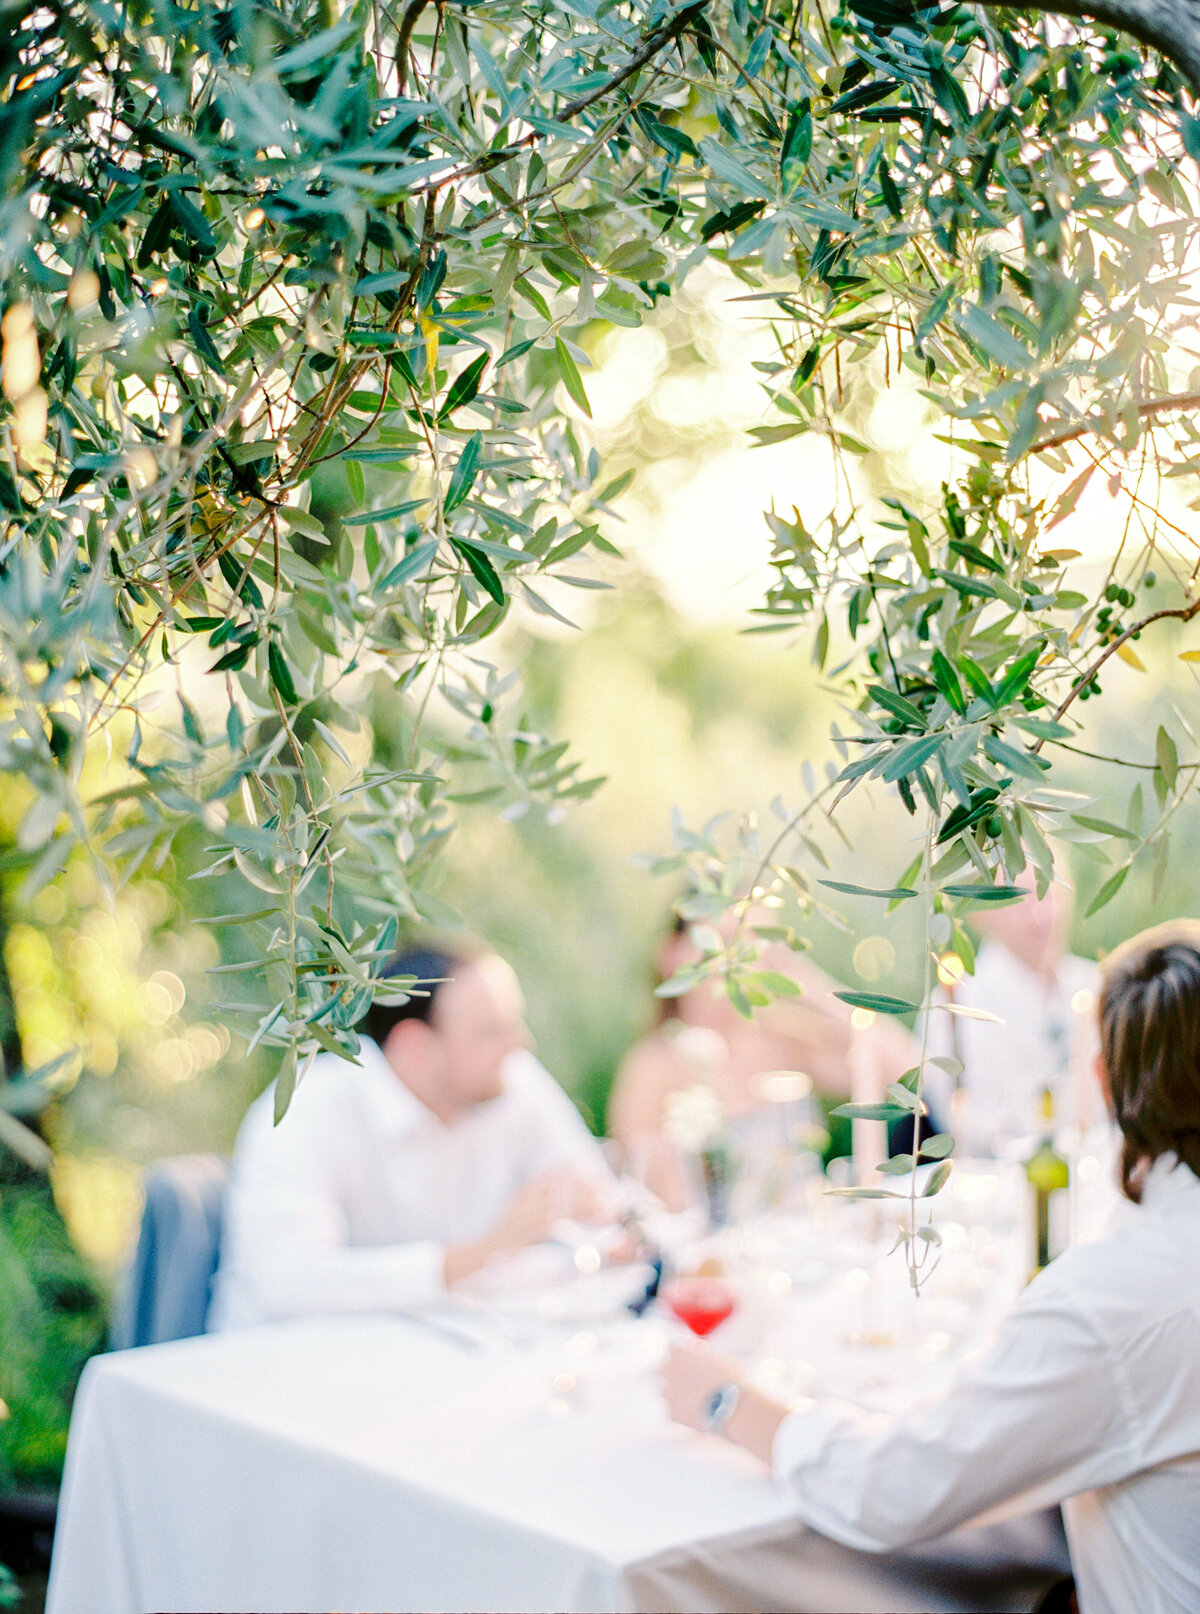 Film photograph of olive branches with out of focus wedding reception table with guests in the background photographed by Italy wedding photographer at Villa Montanare Tuscany wedding